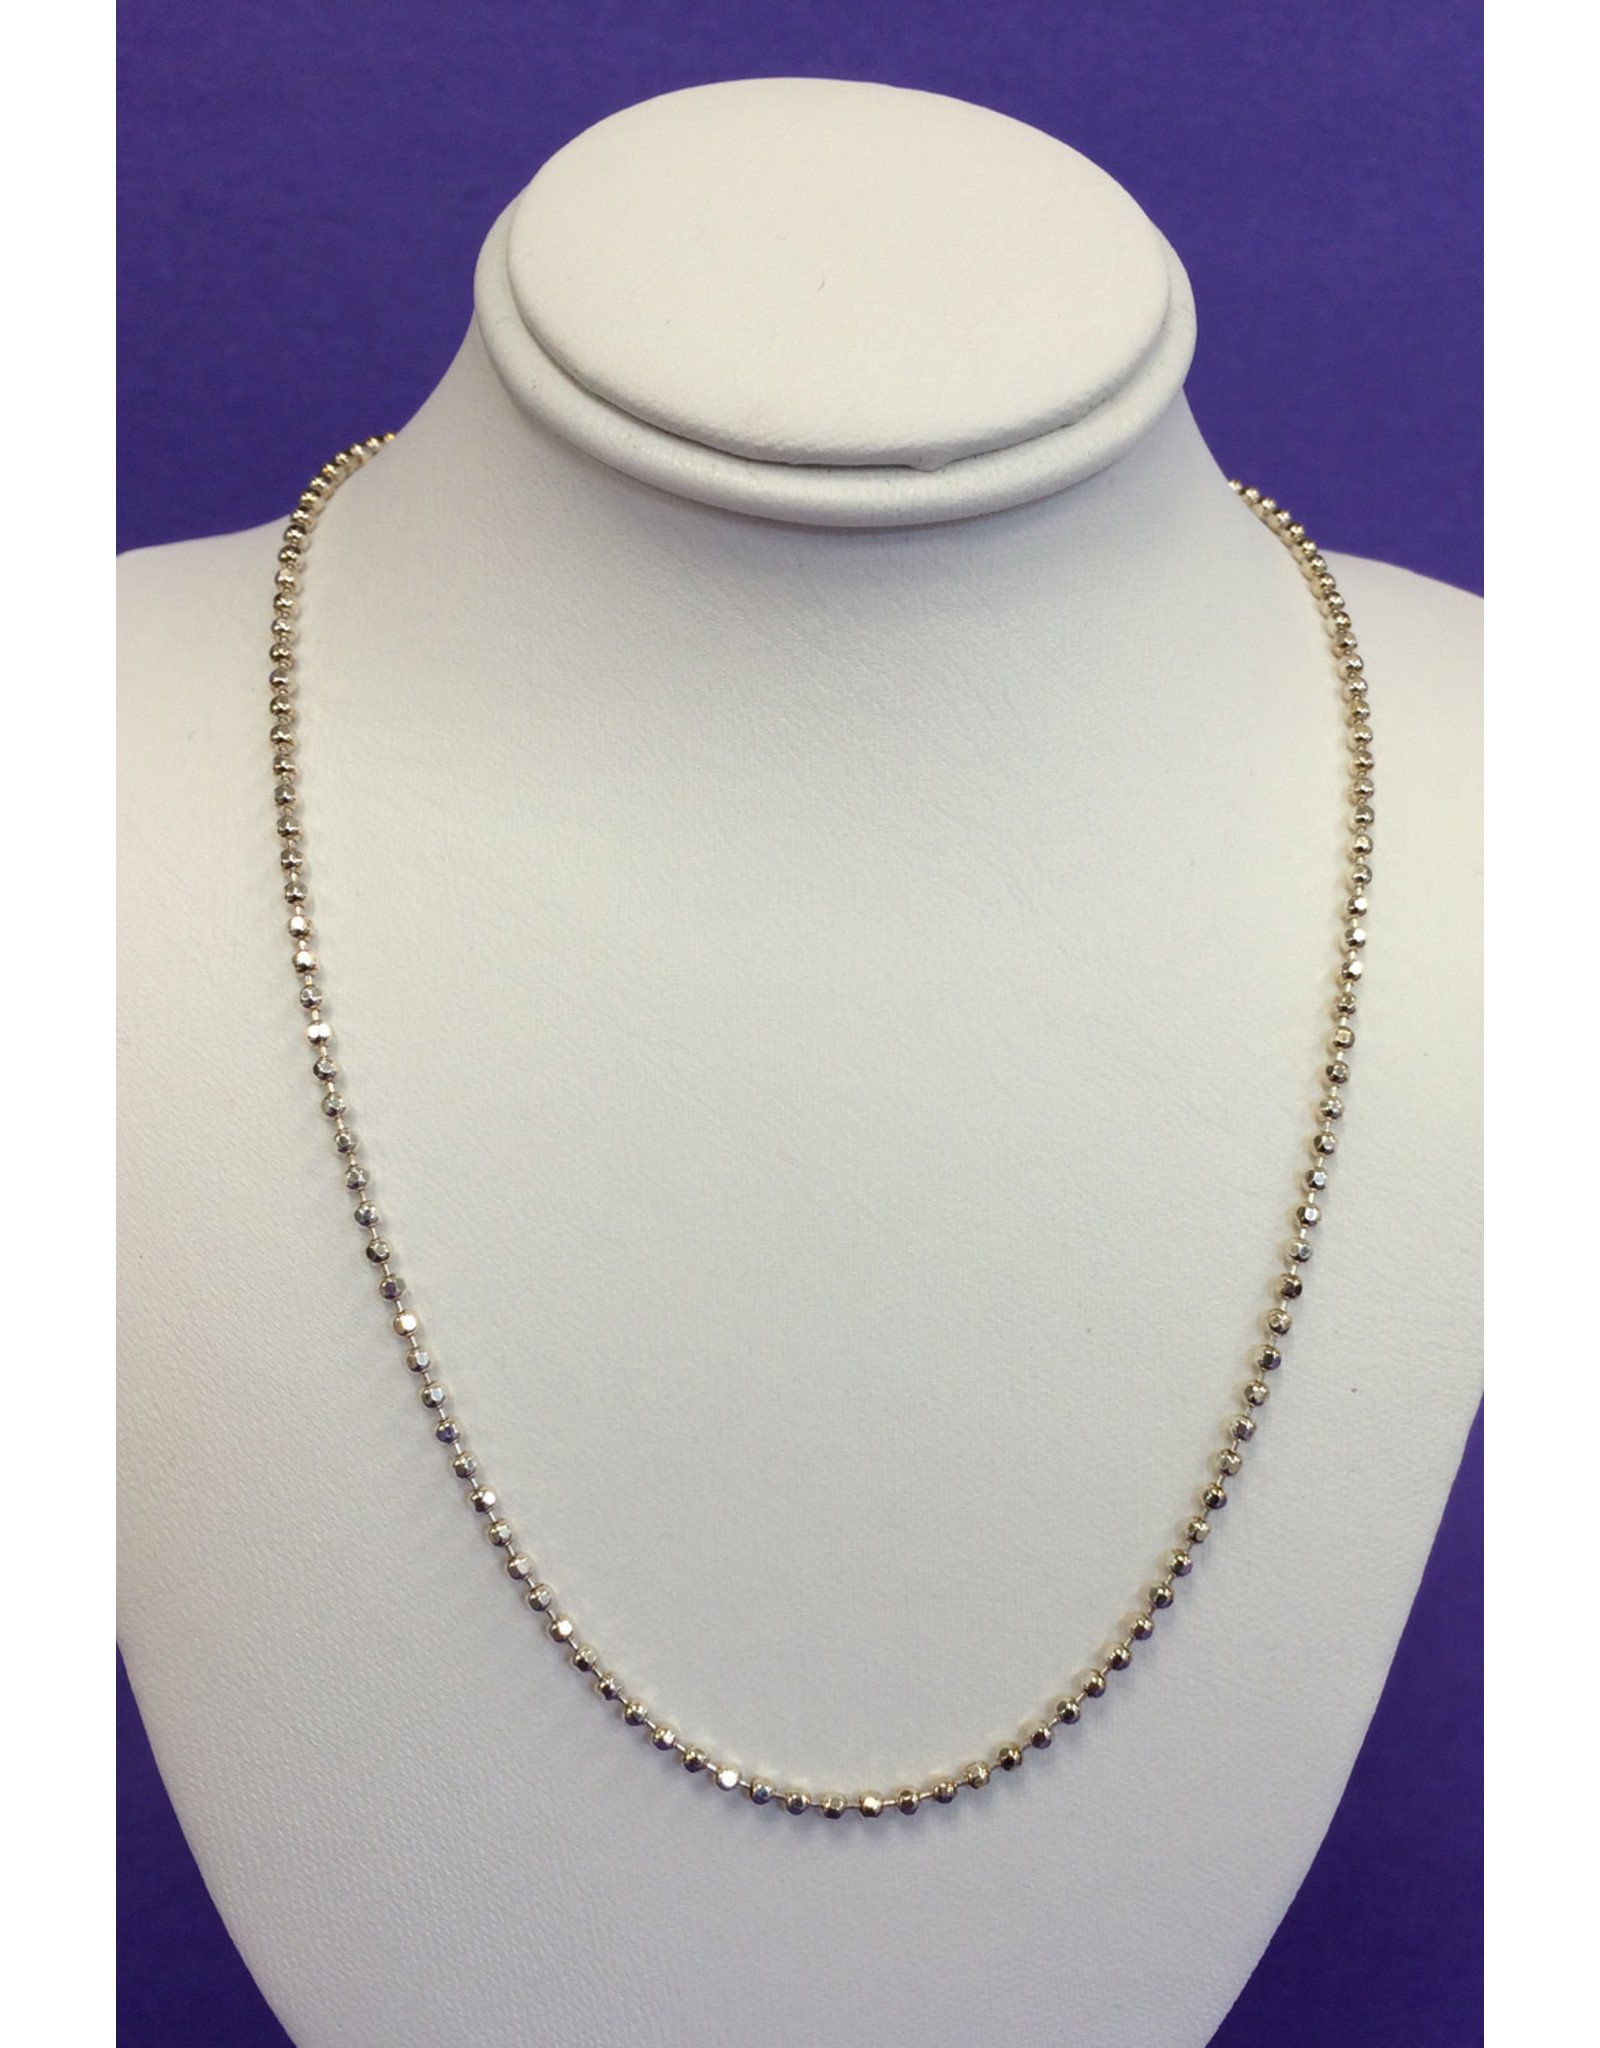 NECKLACE-SILVER BEAD CHAIN 16